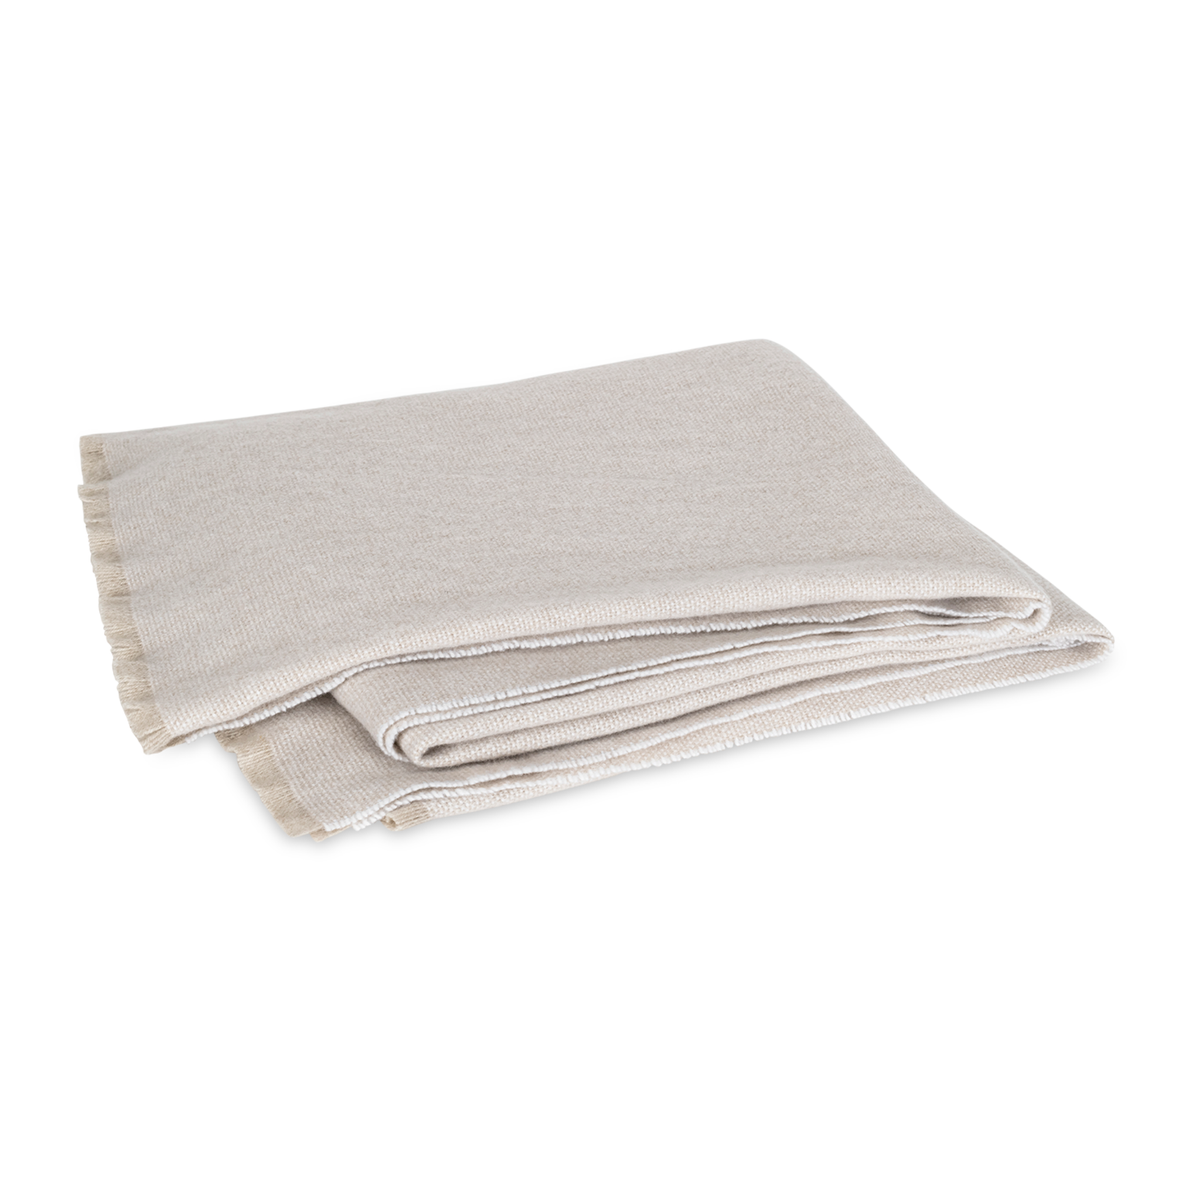 Folded Matouk Agnes Throw in Oat Color Against White Background